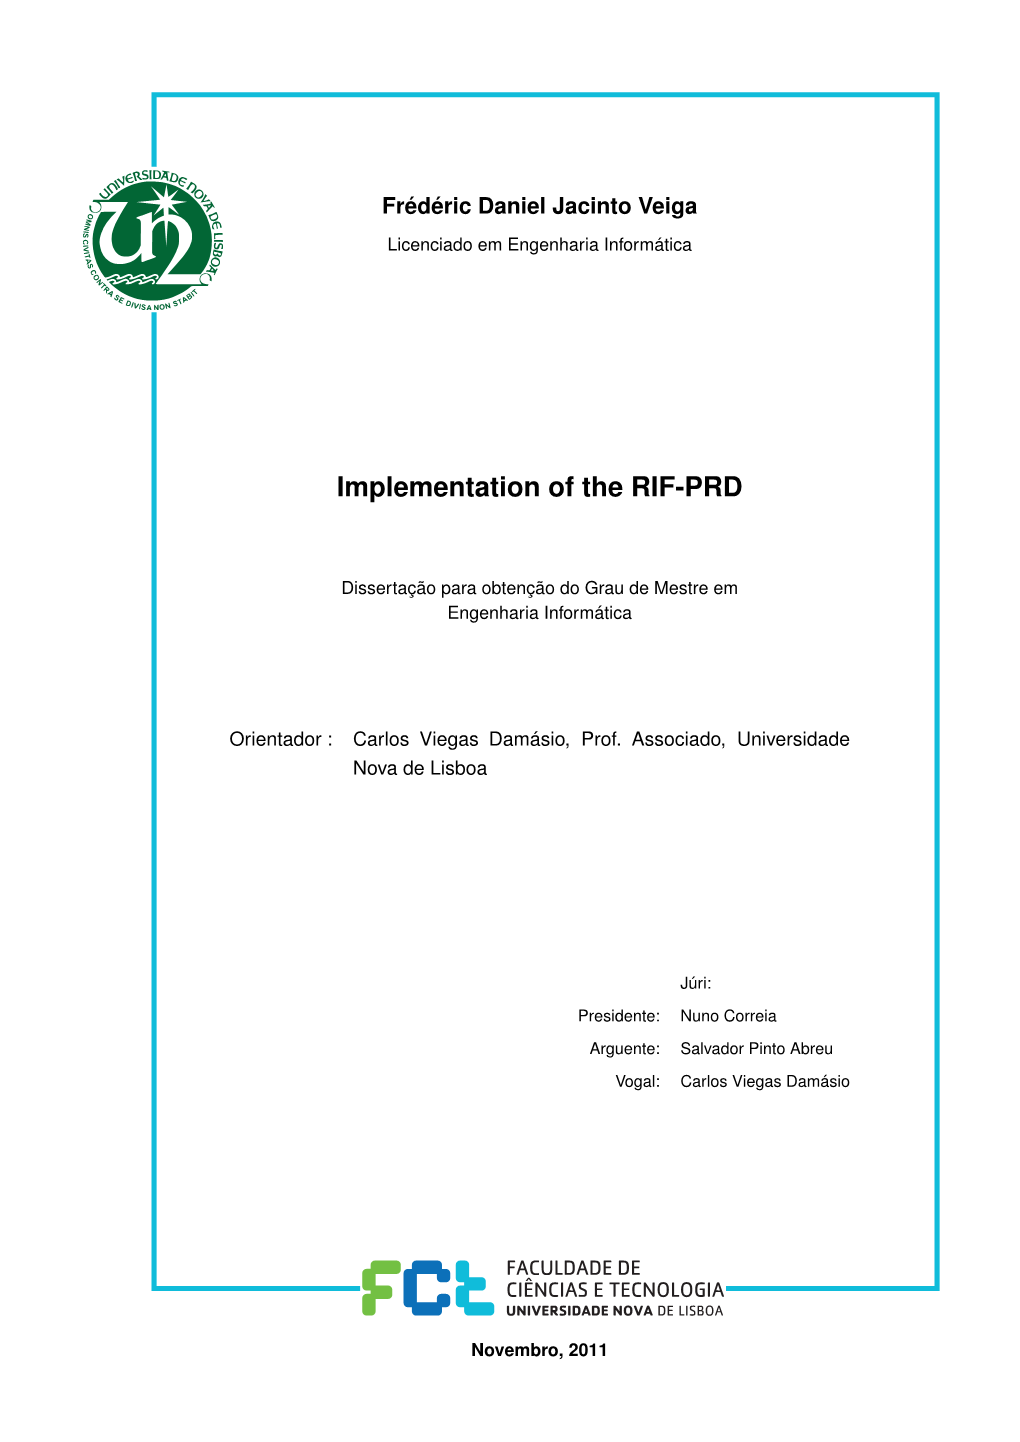 Implementation of the RIF-PRD